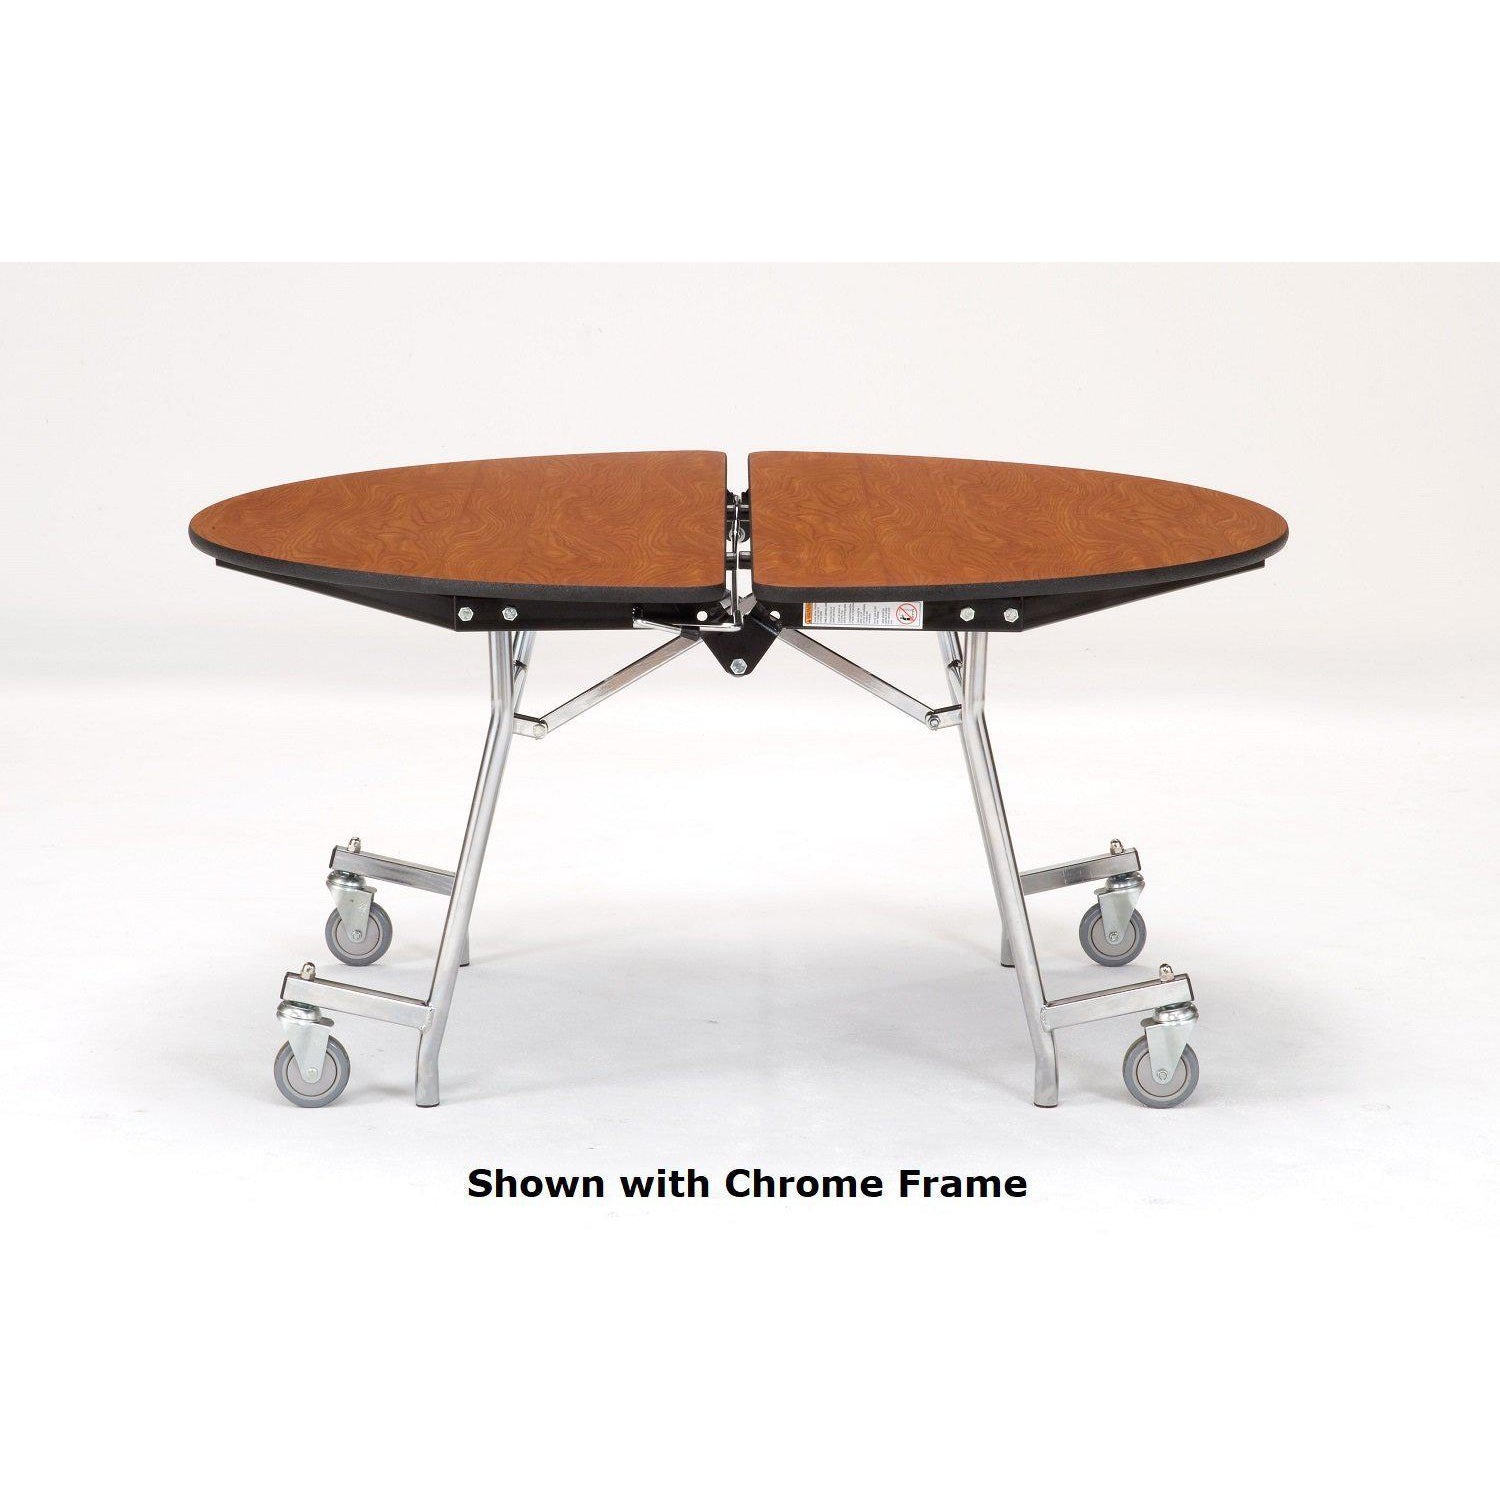 Mobile Shape Cafeteria Table, 48" Round, MDF Core, Black ProtectEdge, Textured Black Frame